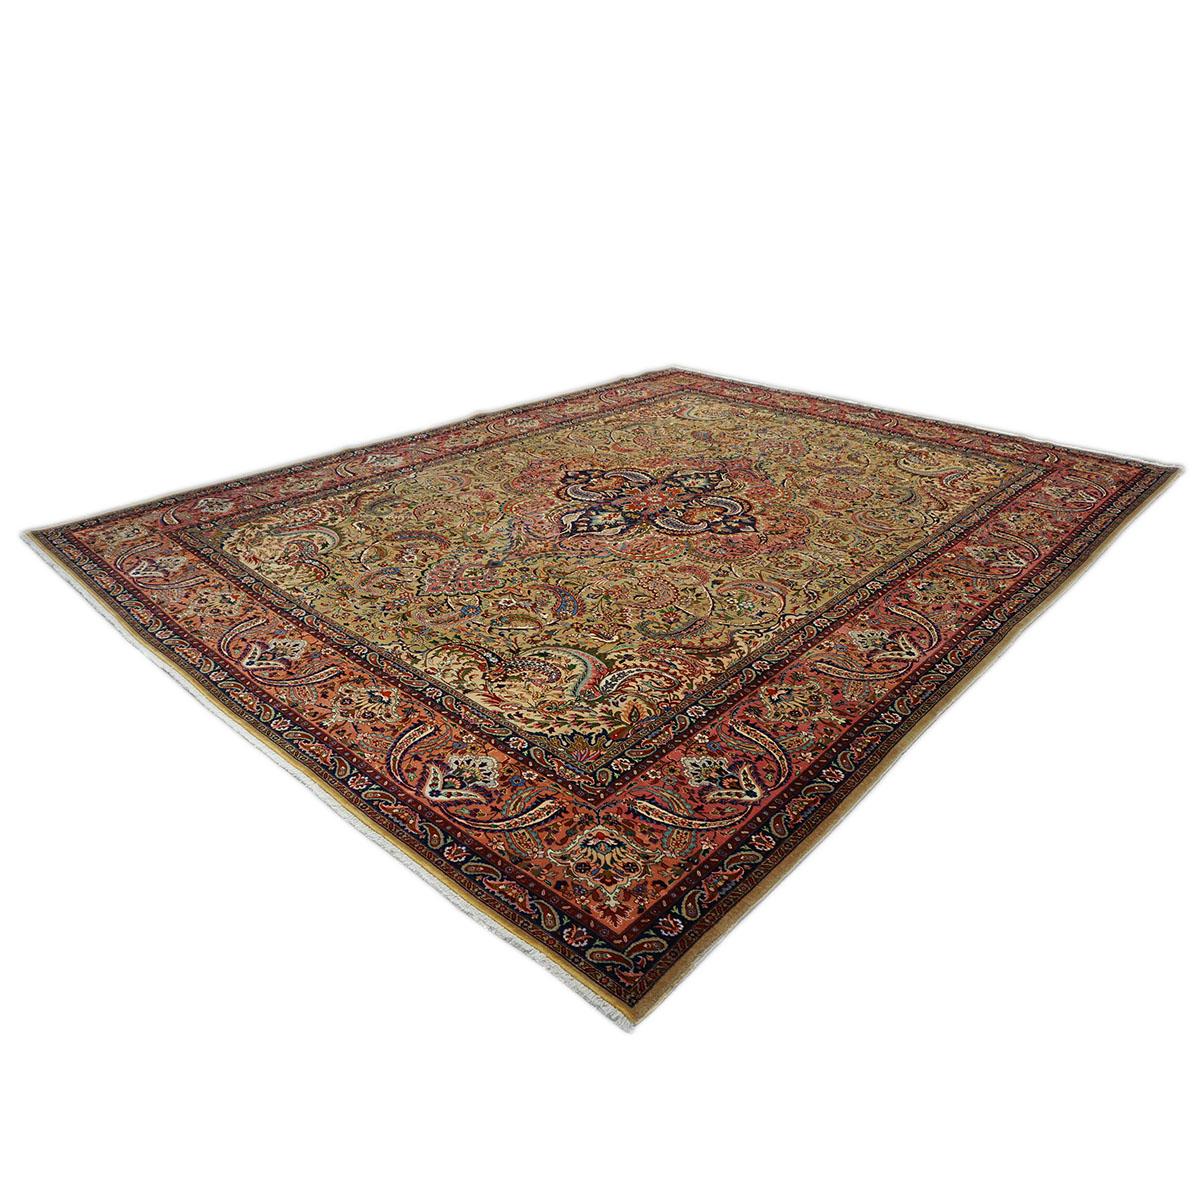 Antique Persian Tabriz Pahlavi 9x12 Taupe, Salmon, & Navy Handmade Area Rug In Good Condition For Sale In Houston, TX